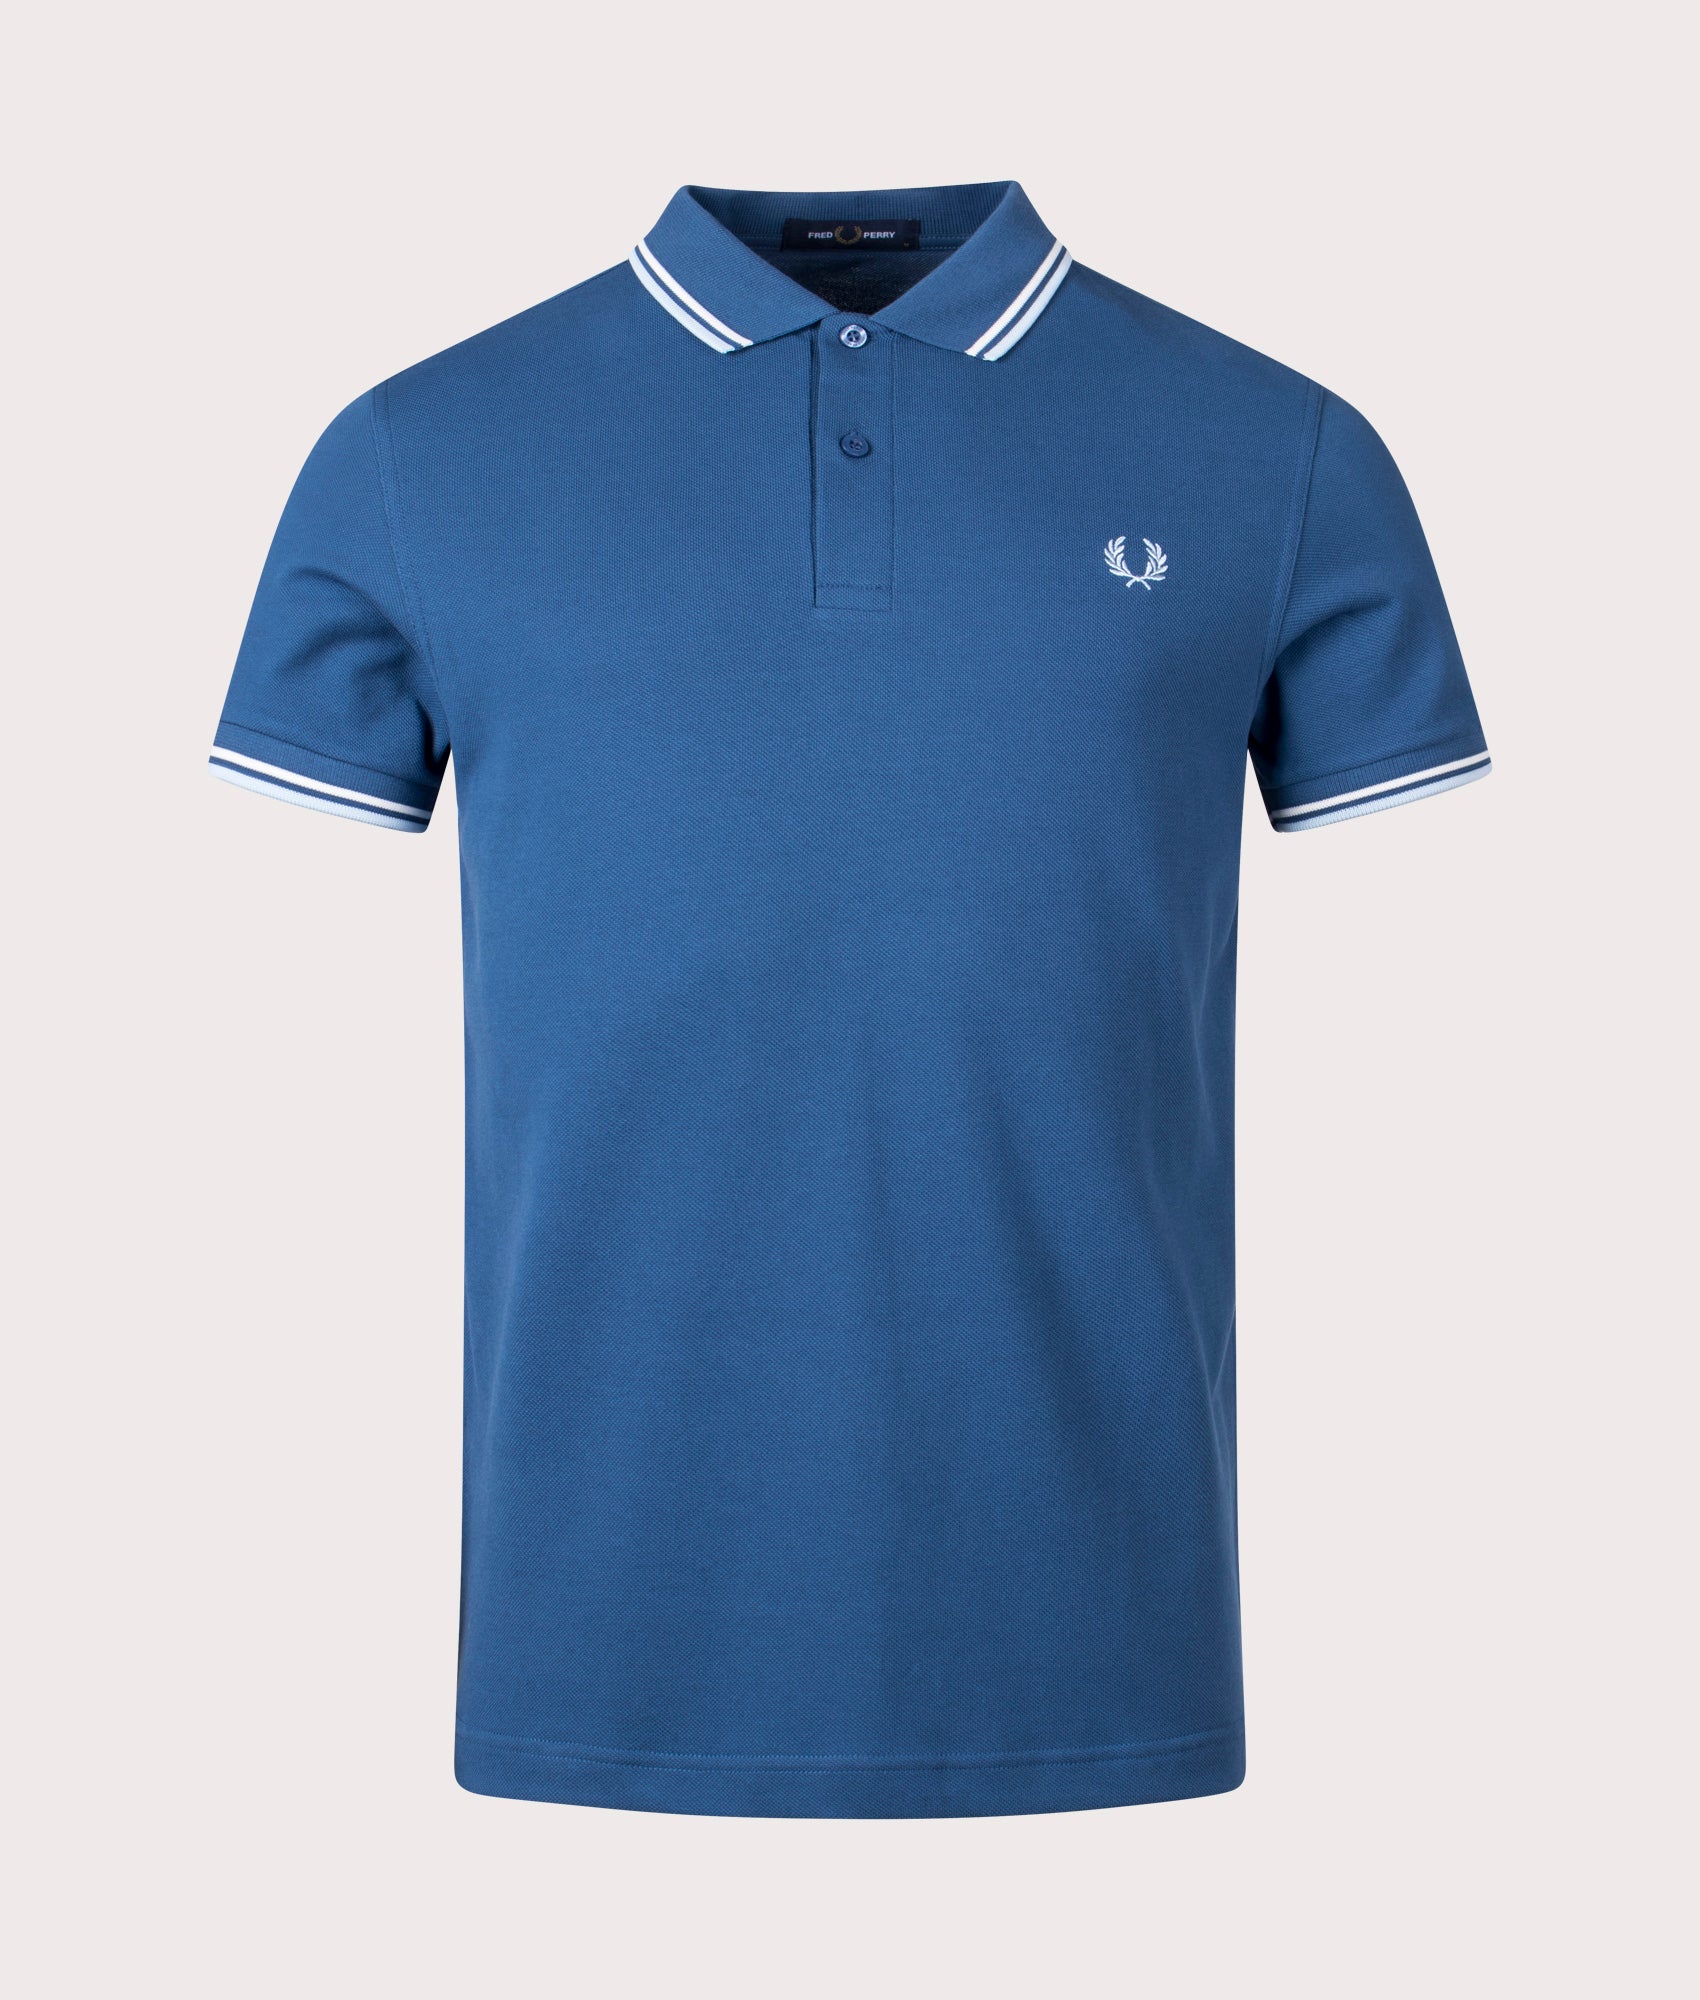 Fred Perry Mens Twin Tipped Polo Shirt - Colour: U91 Midnight Blue/Ecru/Light Ice - Size: Medium